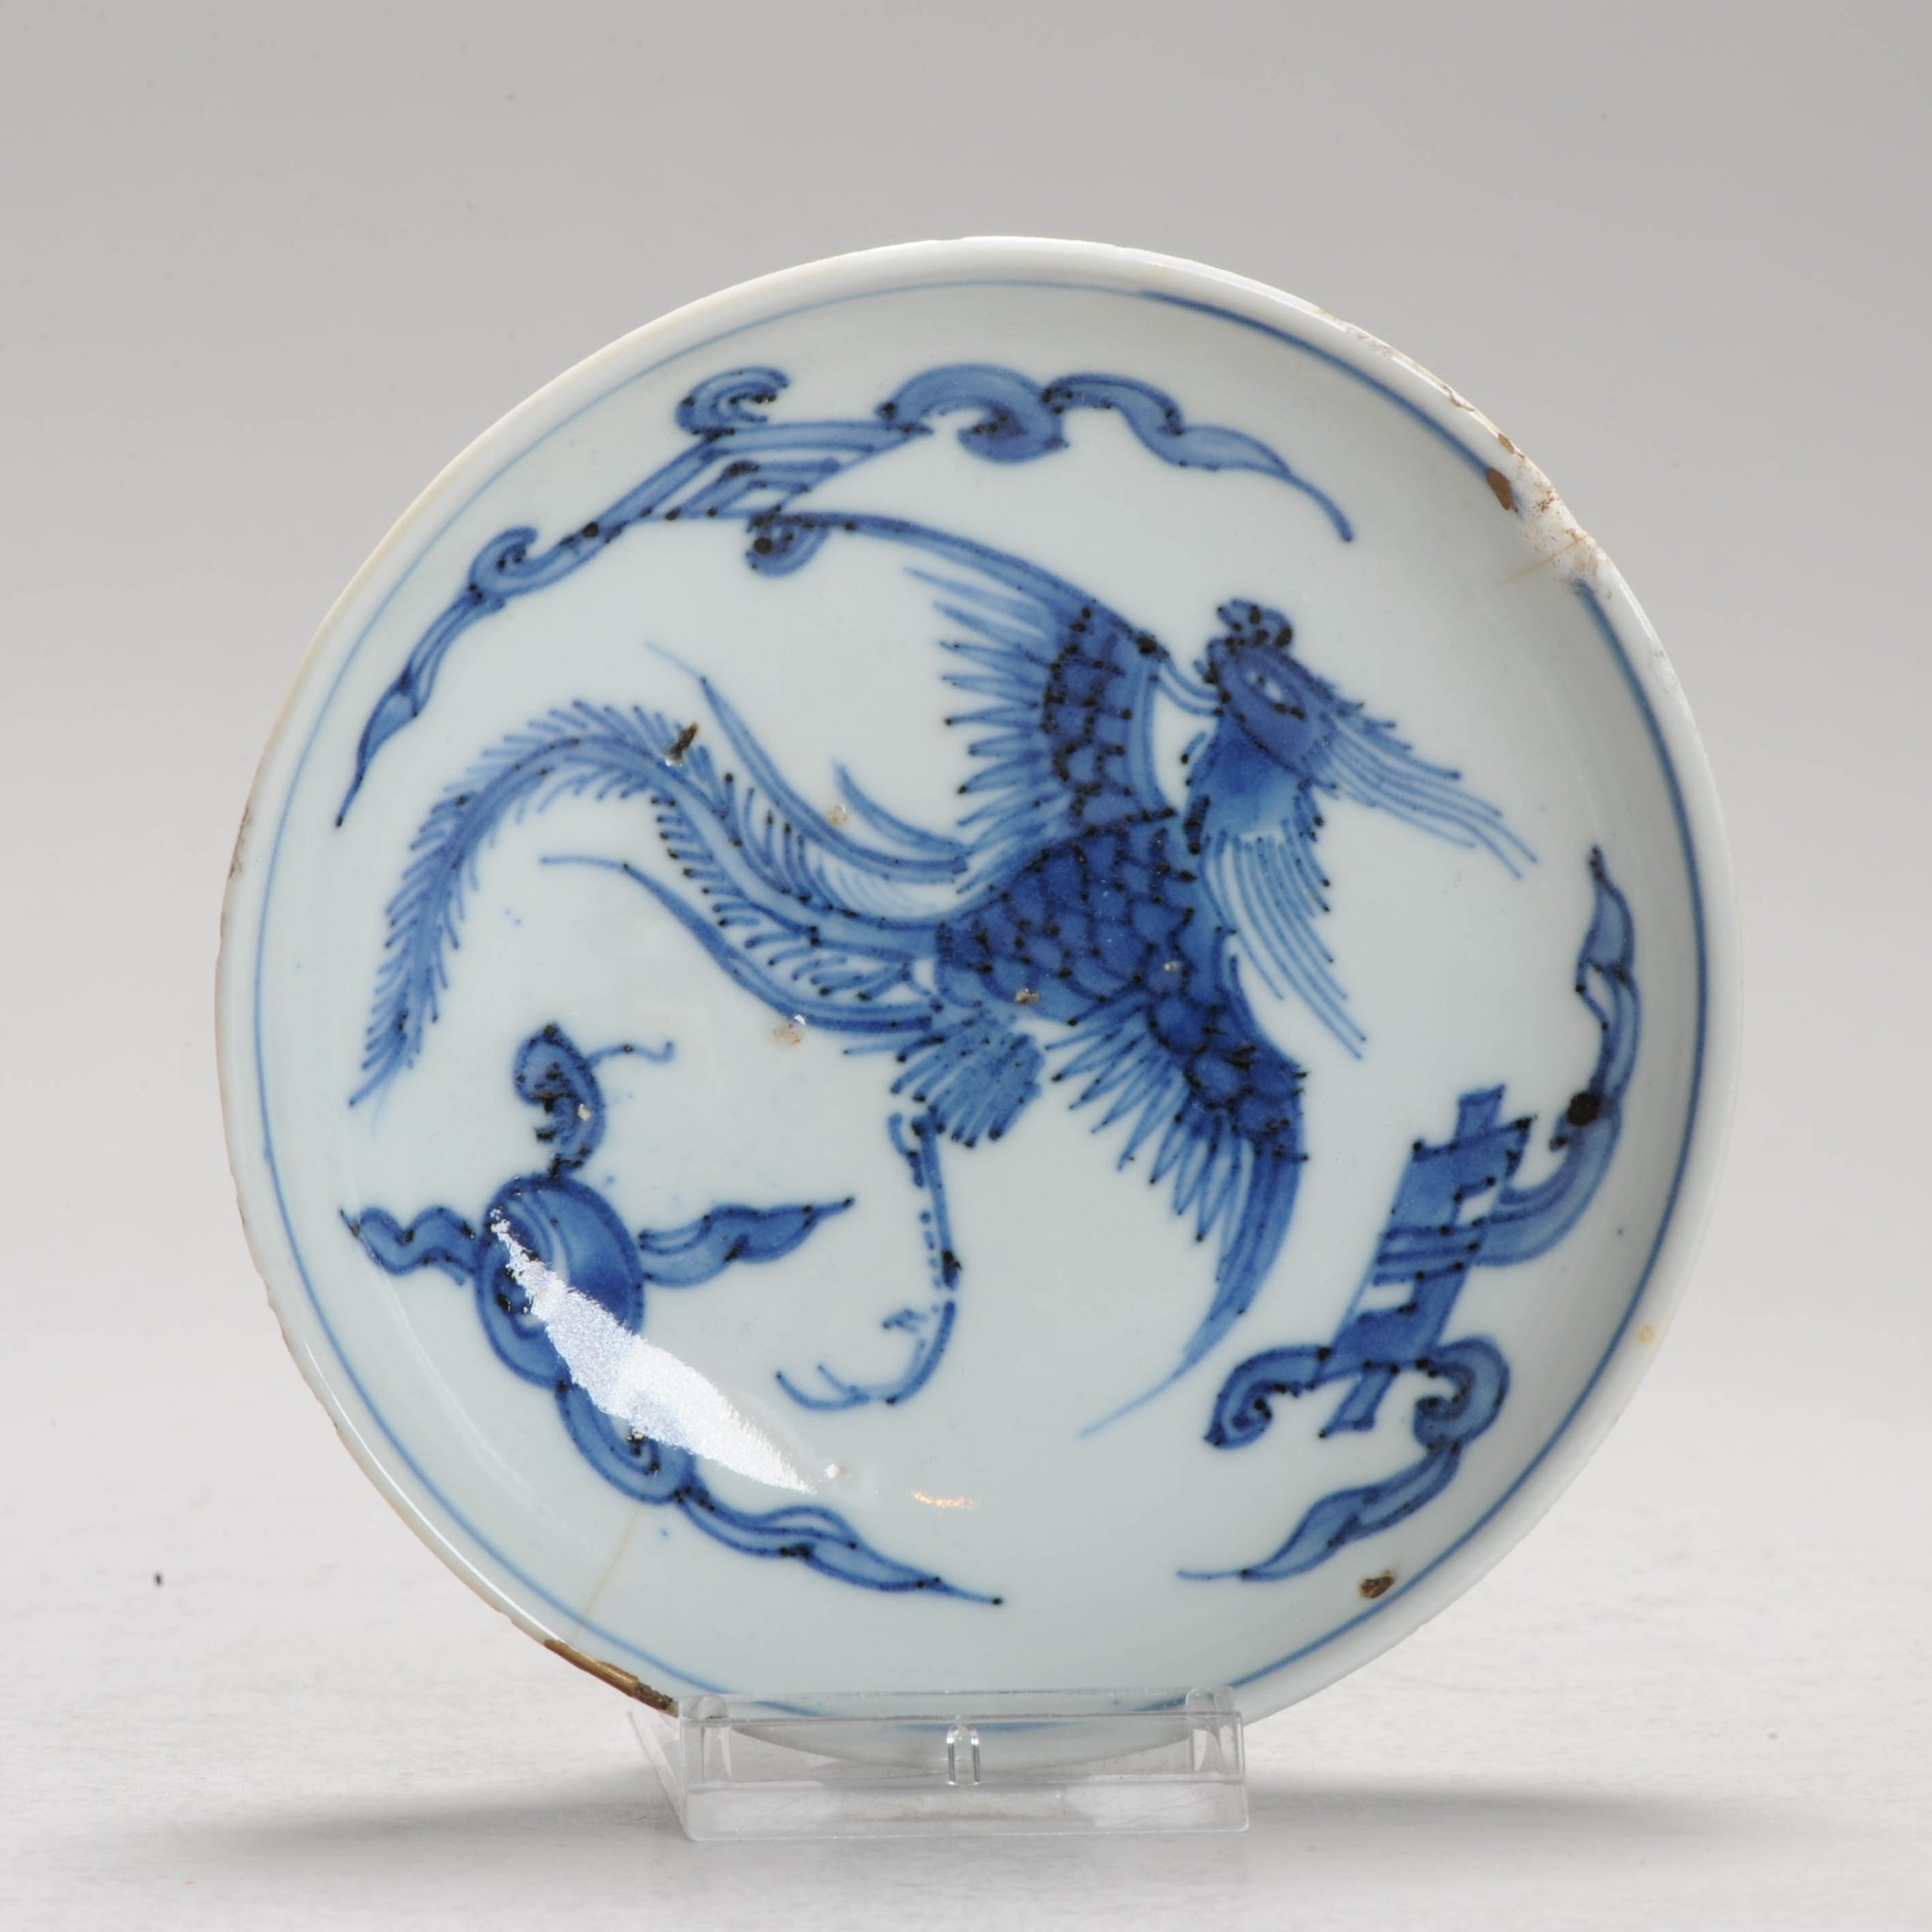 1184 A Chinese porcelain Ming Blue and White Dish with a Fenghuang